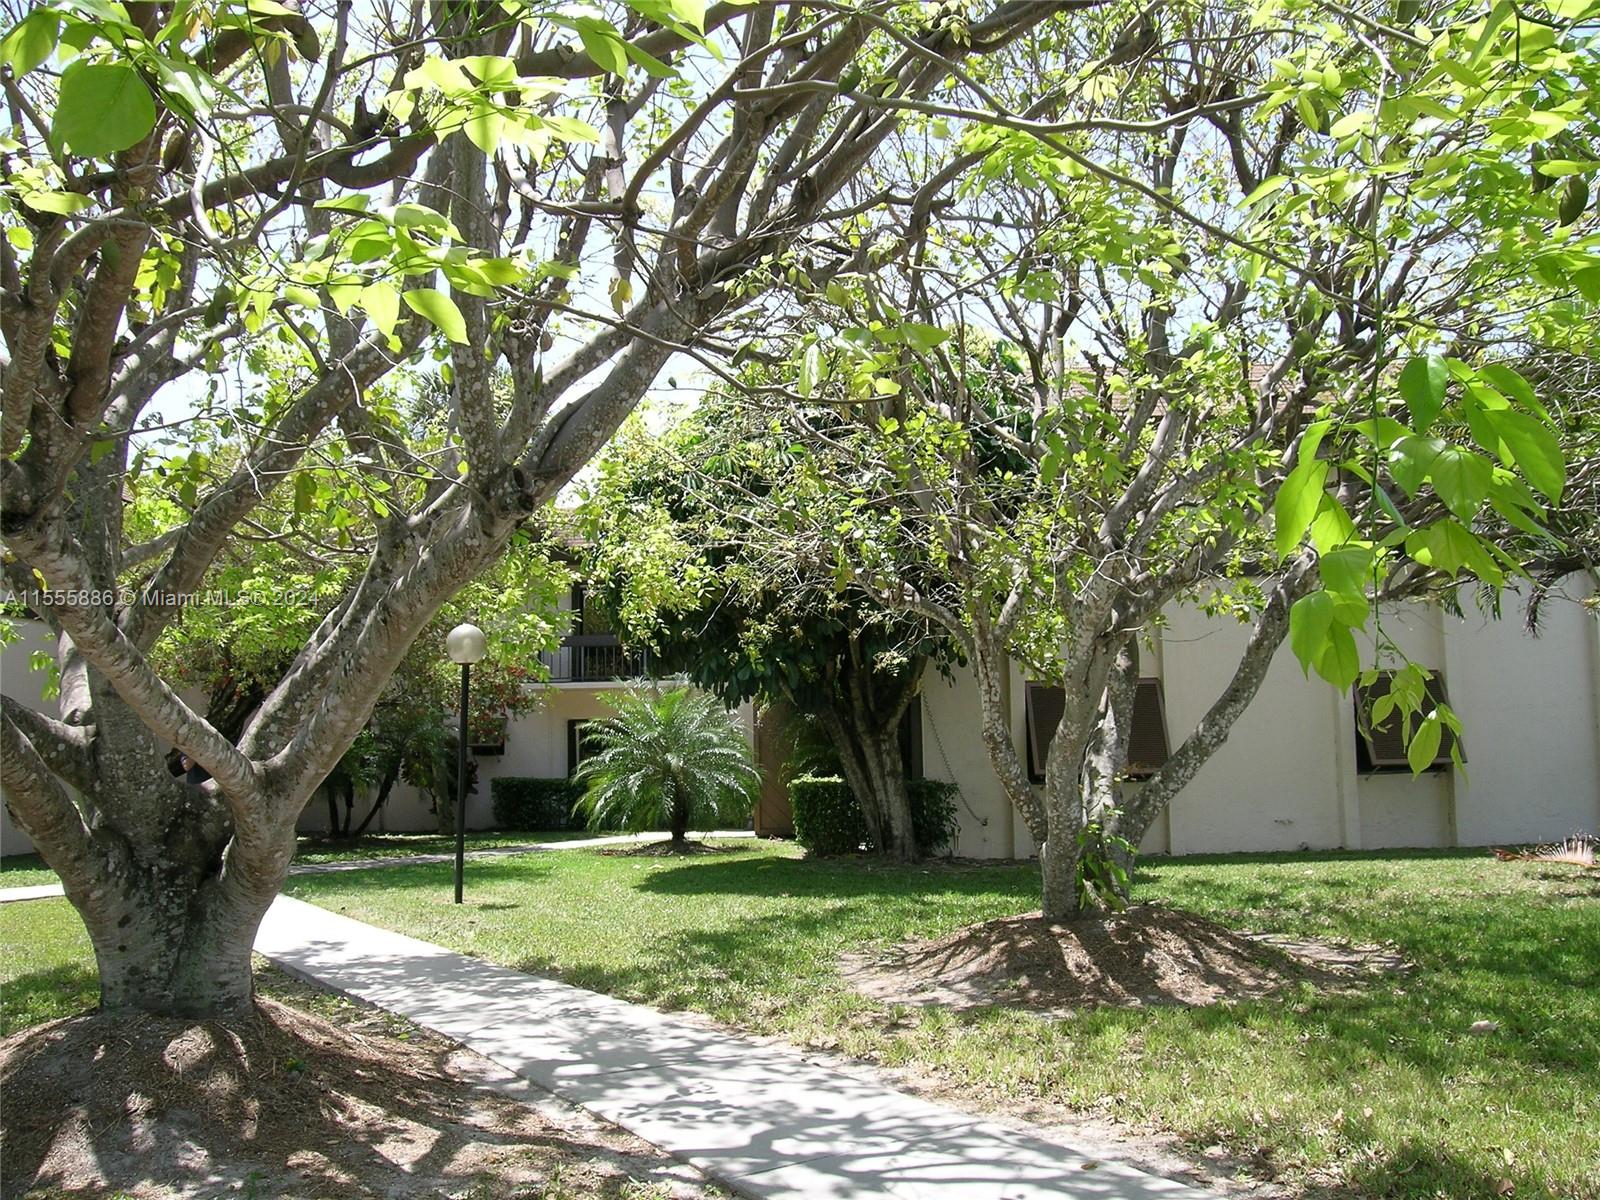 a view of a yard in front of a tree